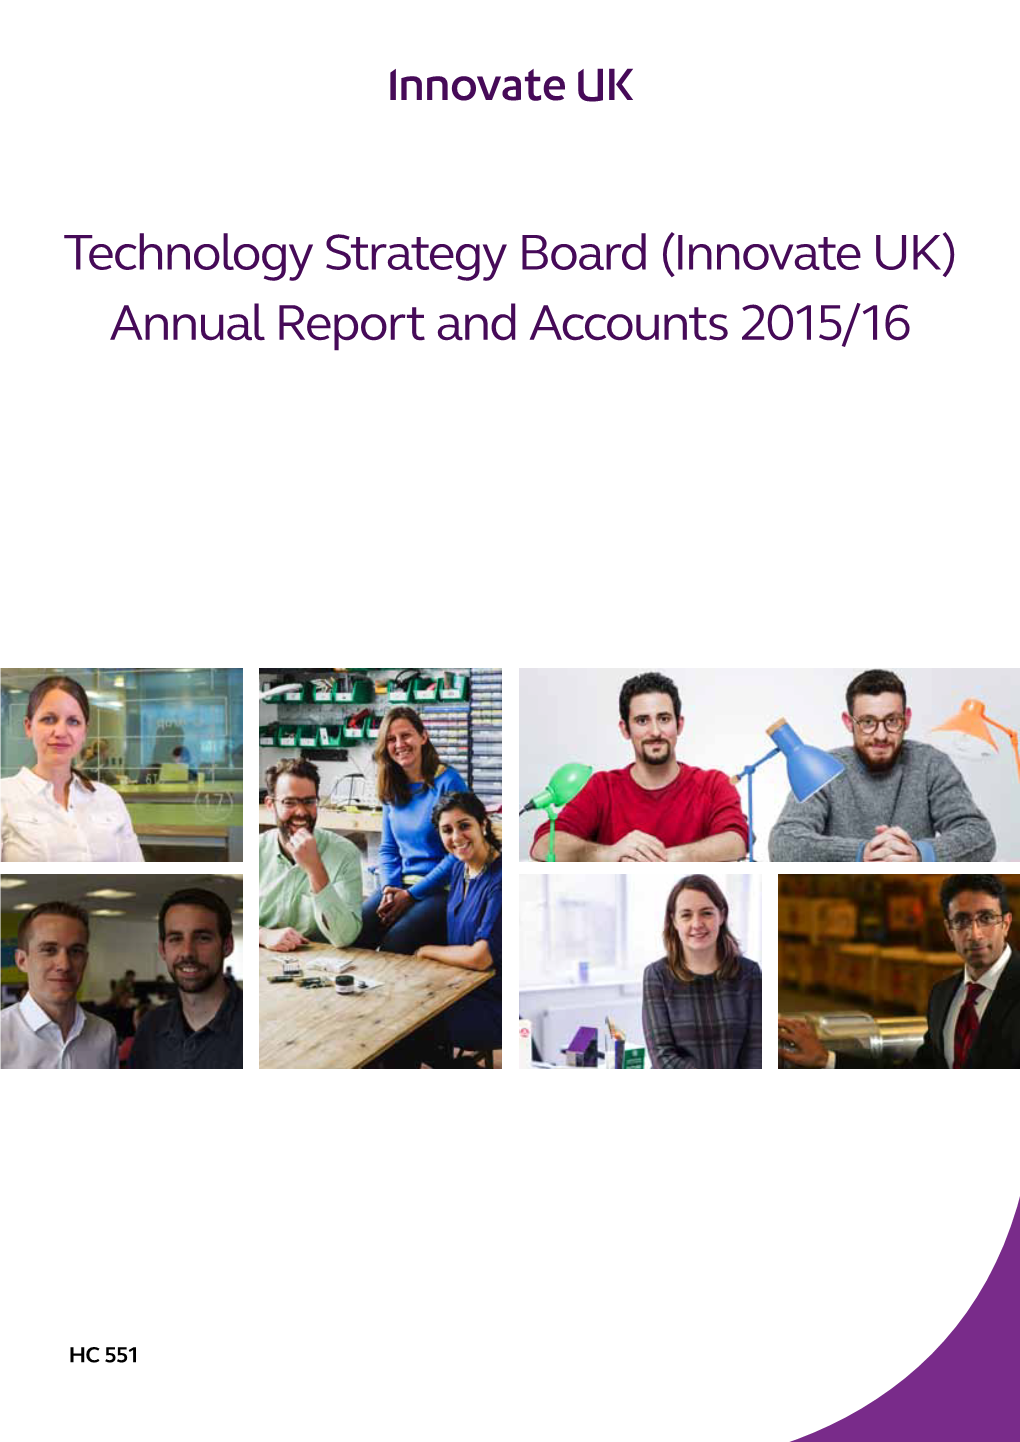 Technology Strategy Board (Innovate UK) Annual Report and Accounts 2015/16